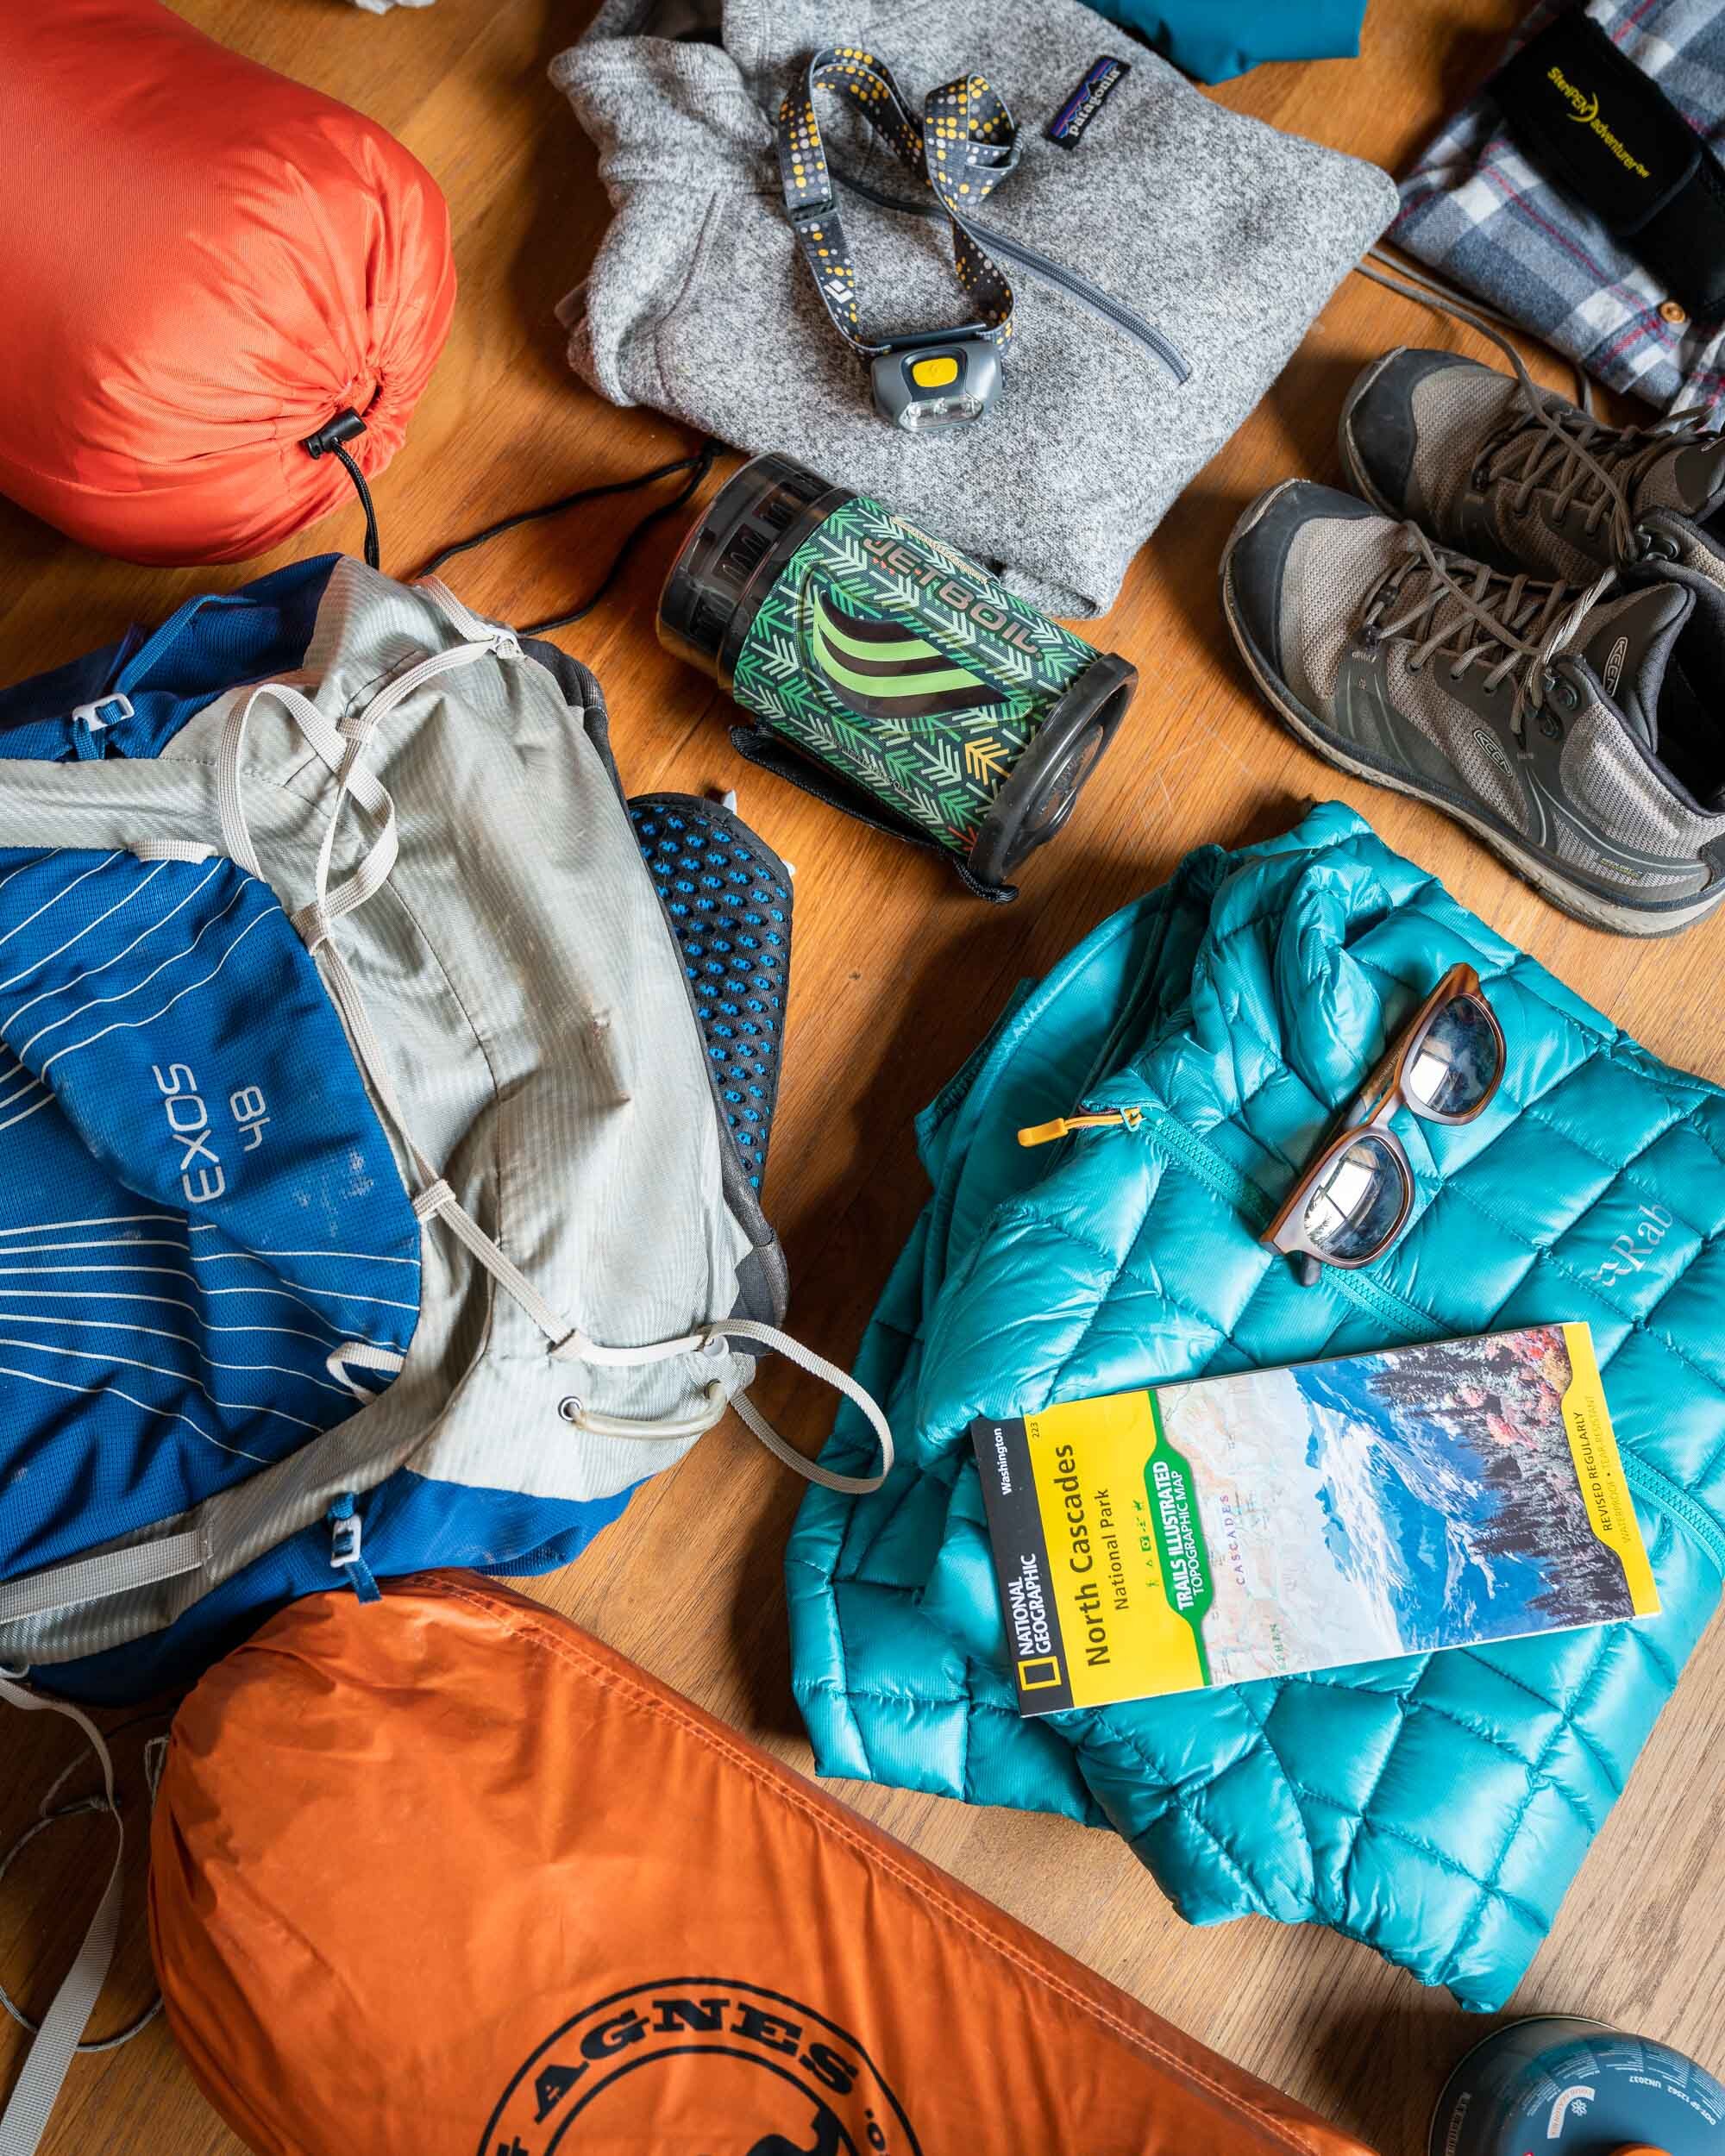 It’s always a good idea to lay all your camping gear out before packing to make sure you have everything you need.